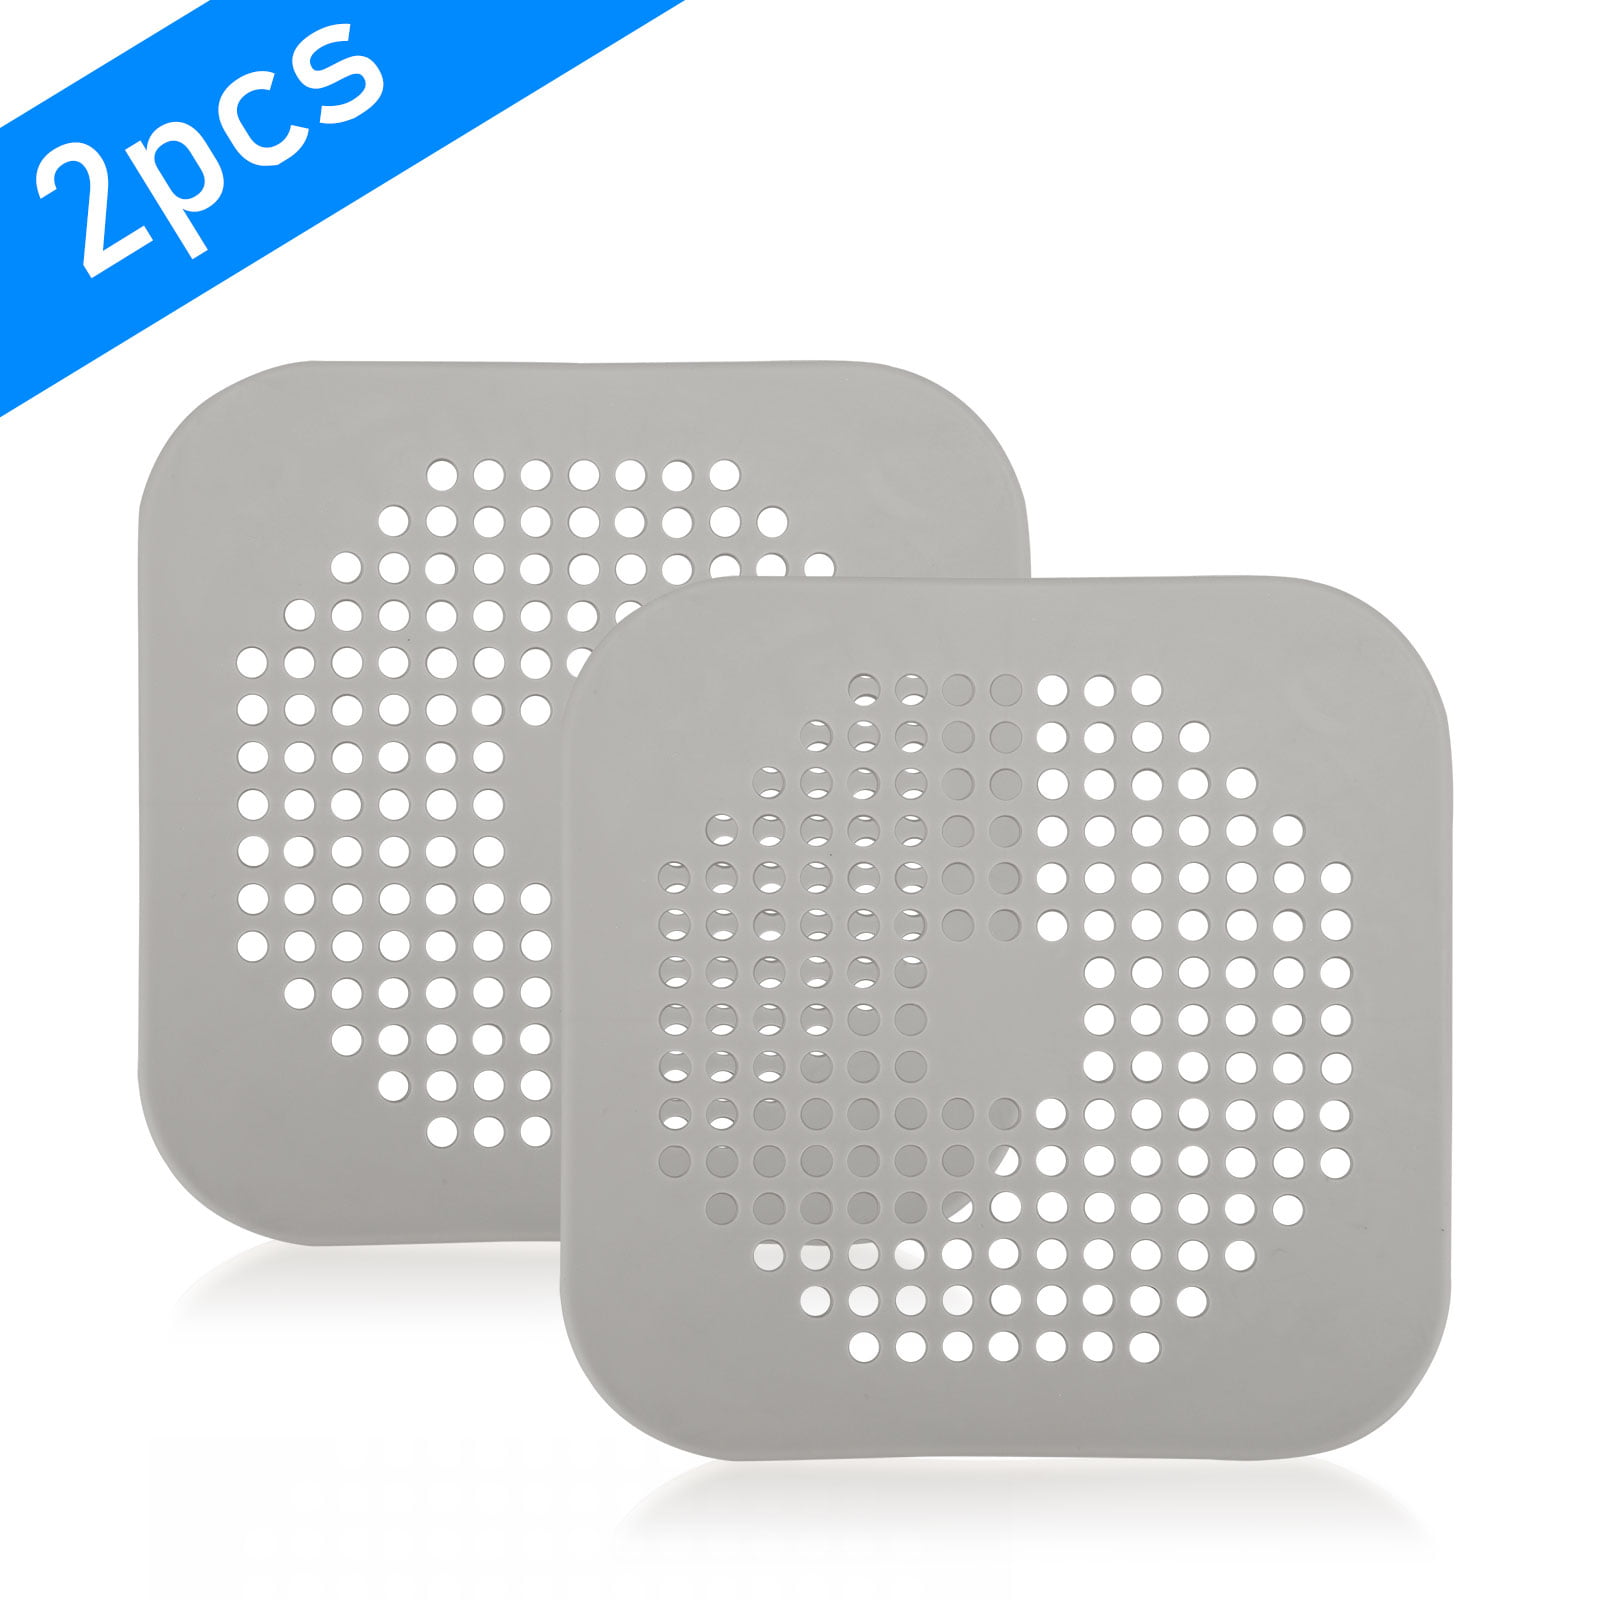 Suitable for Bathroom Bathtub and Kitchen Easy to Install 2 Pack New Upgrade Drain Hair Catcher Silicone Hair Stopper Shower Drain Covers with 4 Suction Cups